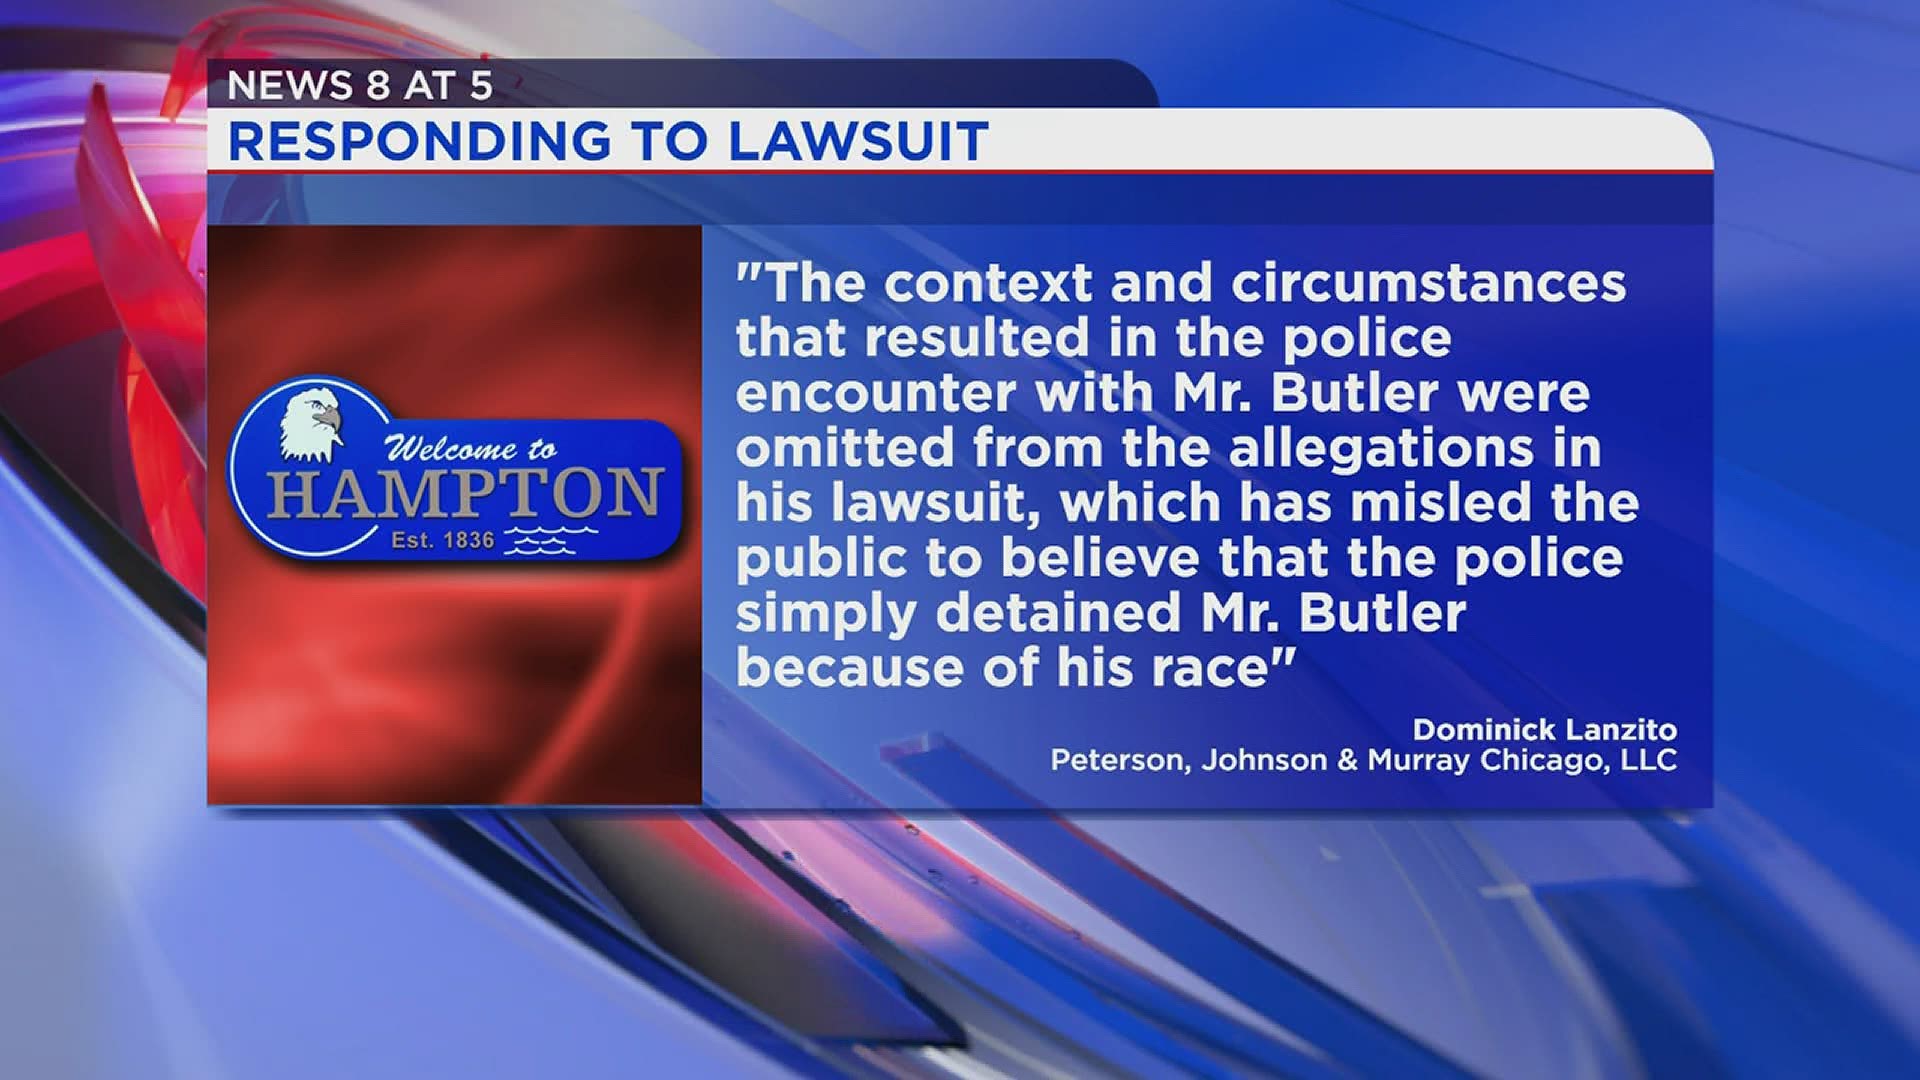 Lawyers representing the village have spoken in regards to a lawsuit about racial profiling